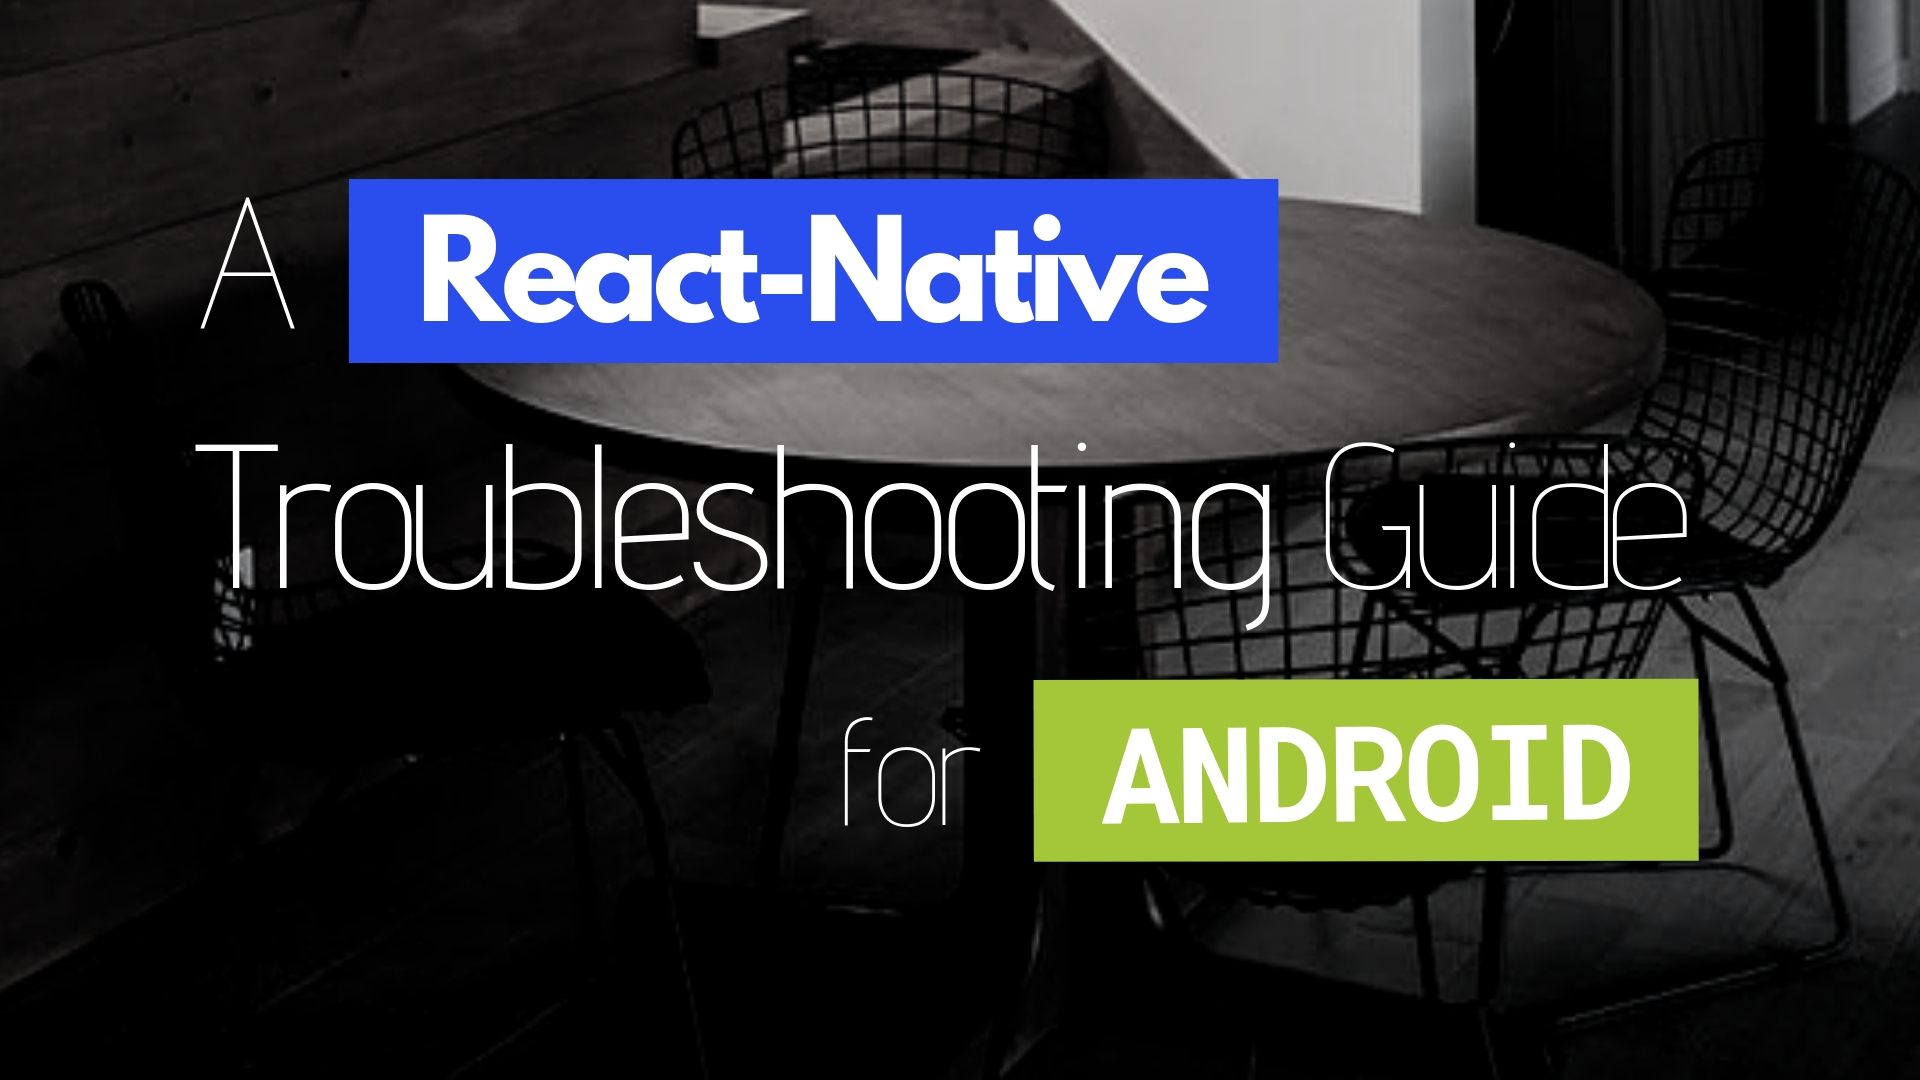 A React-Native Troubleshooting Guide for Android